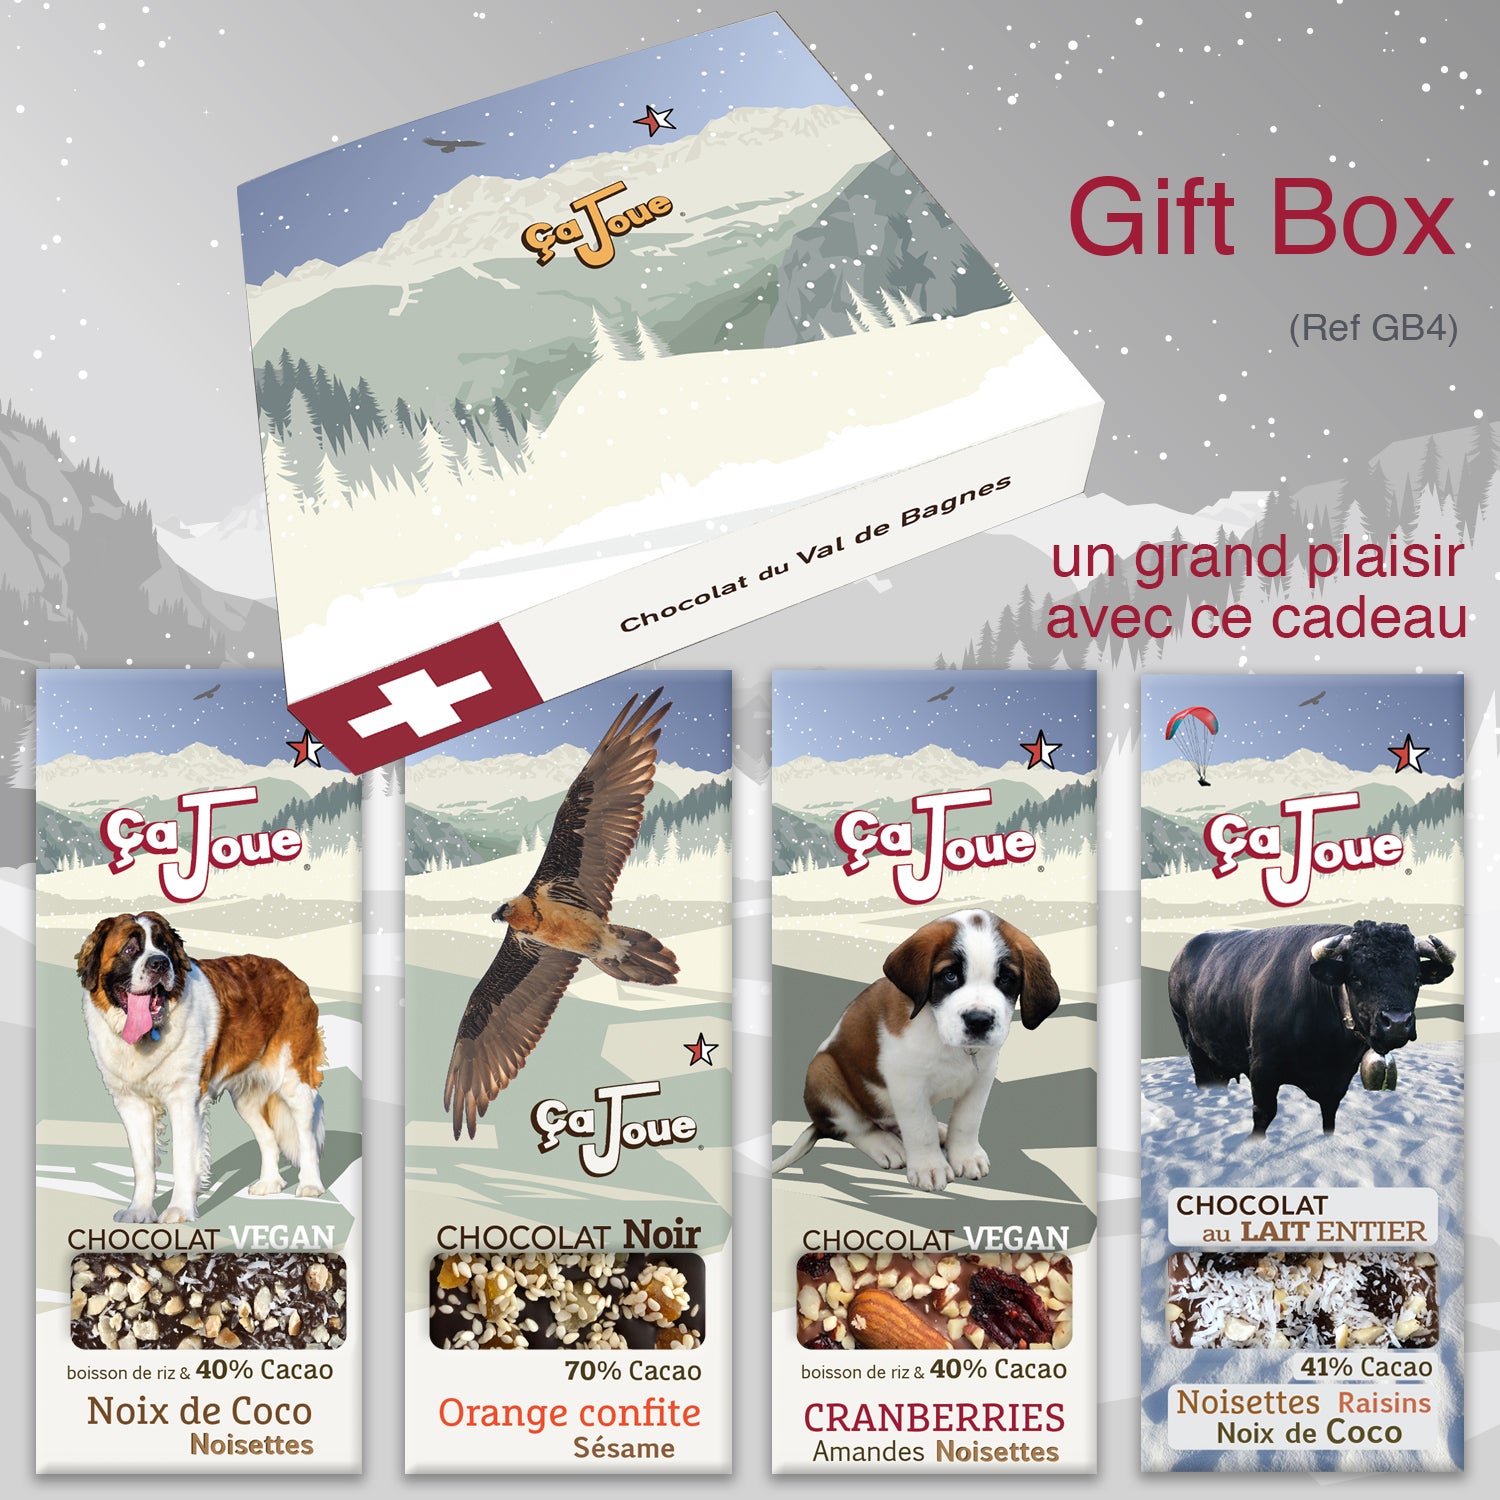 Gift Box (Ref GB4) Chocolate from Val de Bagnes